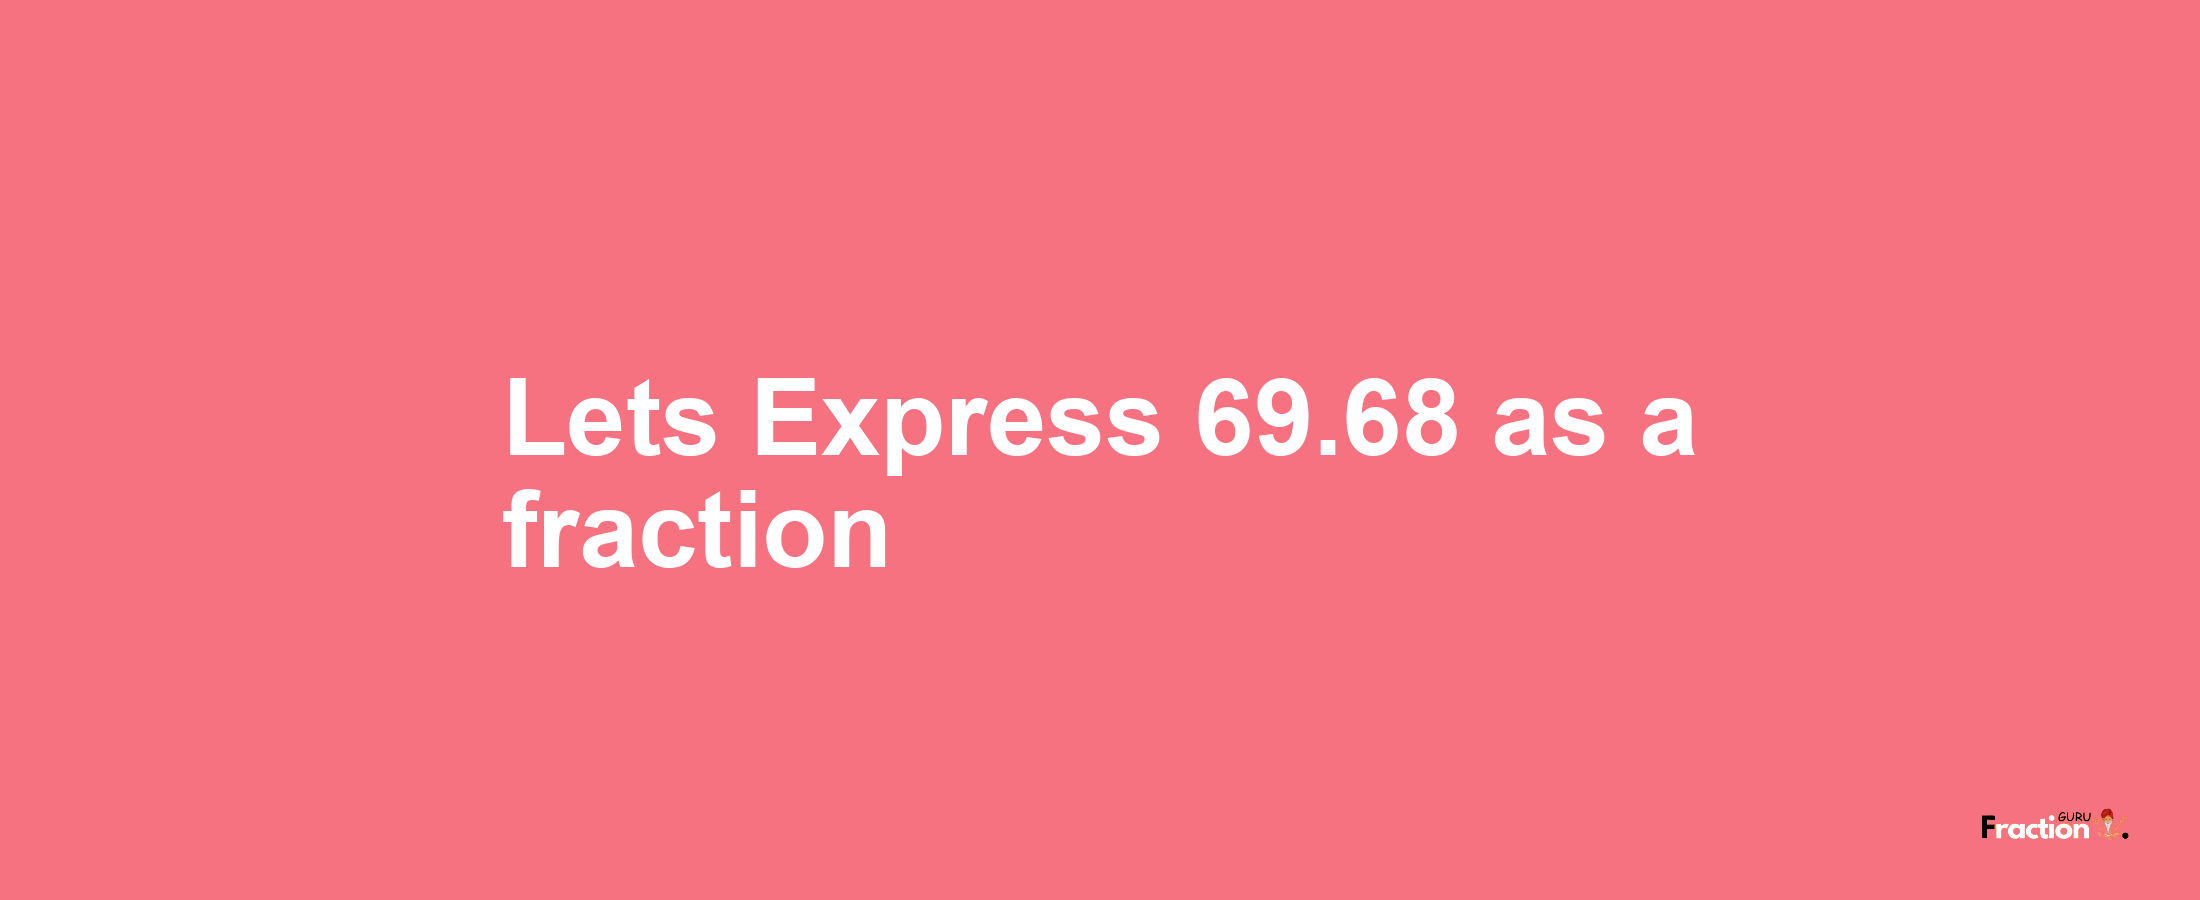 Lets Express 69.68 as afraction